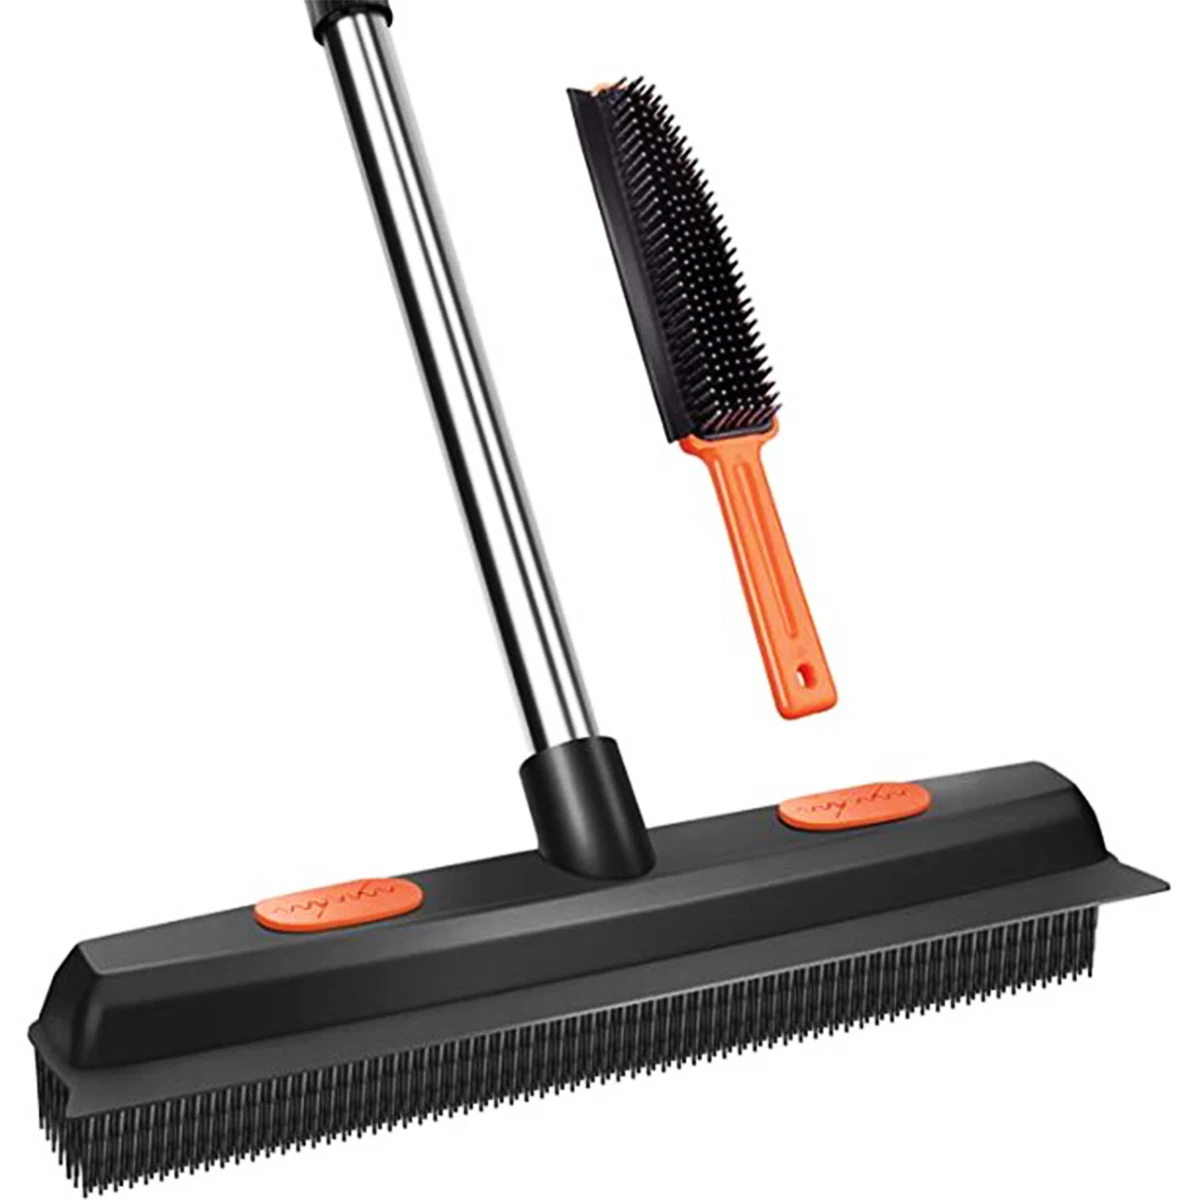 https://ae01.alicdn.com/kf/Sc20c73047acb42729c2e25b9576ef372N/Rubber-Broom-with-Squeegee-for-Carpet-Pet-Hair-Remover-49In-Long-Handled-Fur-Remover-Carpet-Rake.jpg